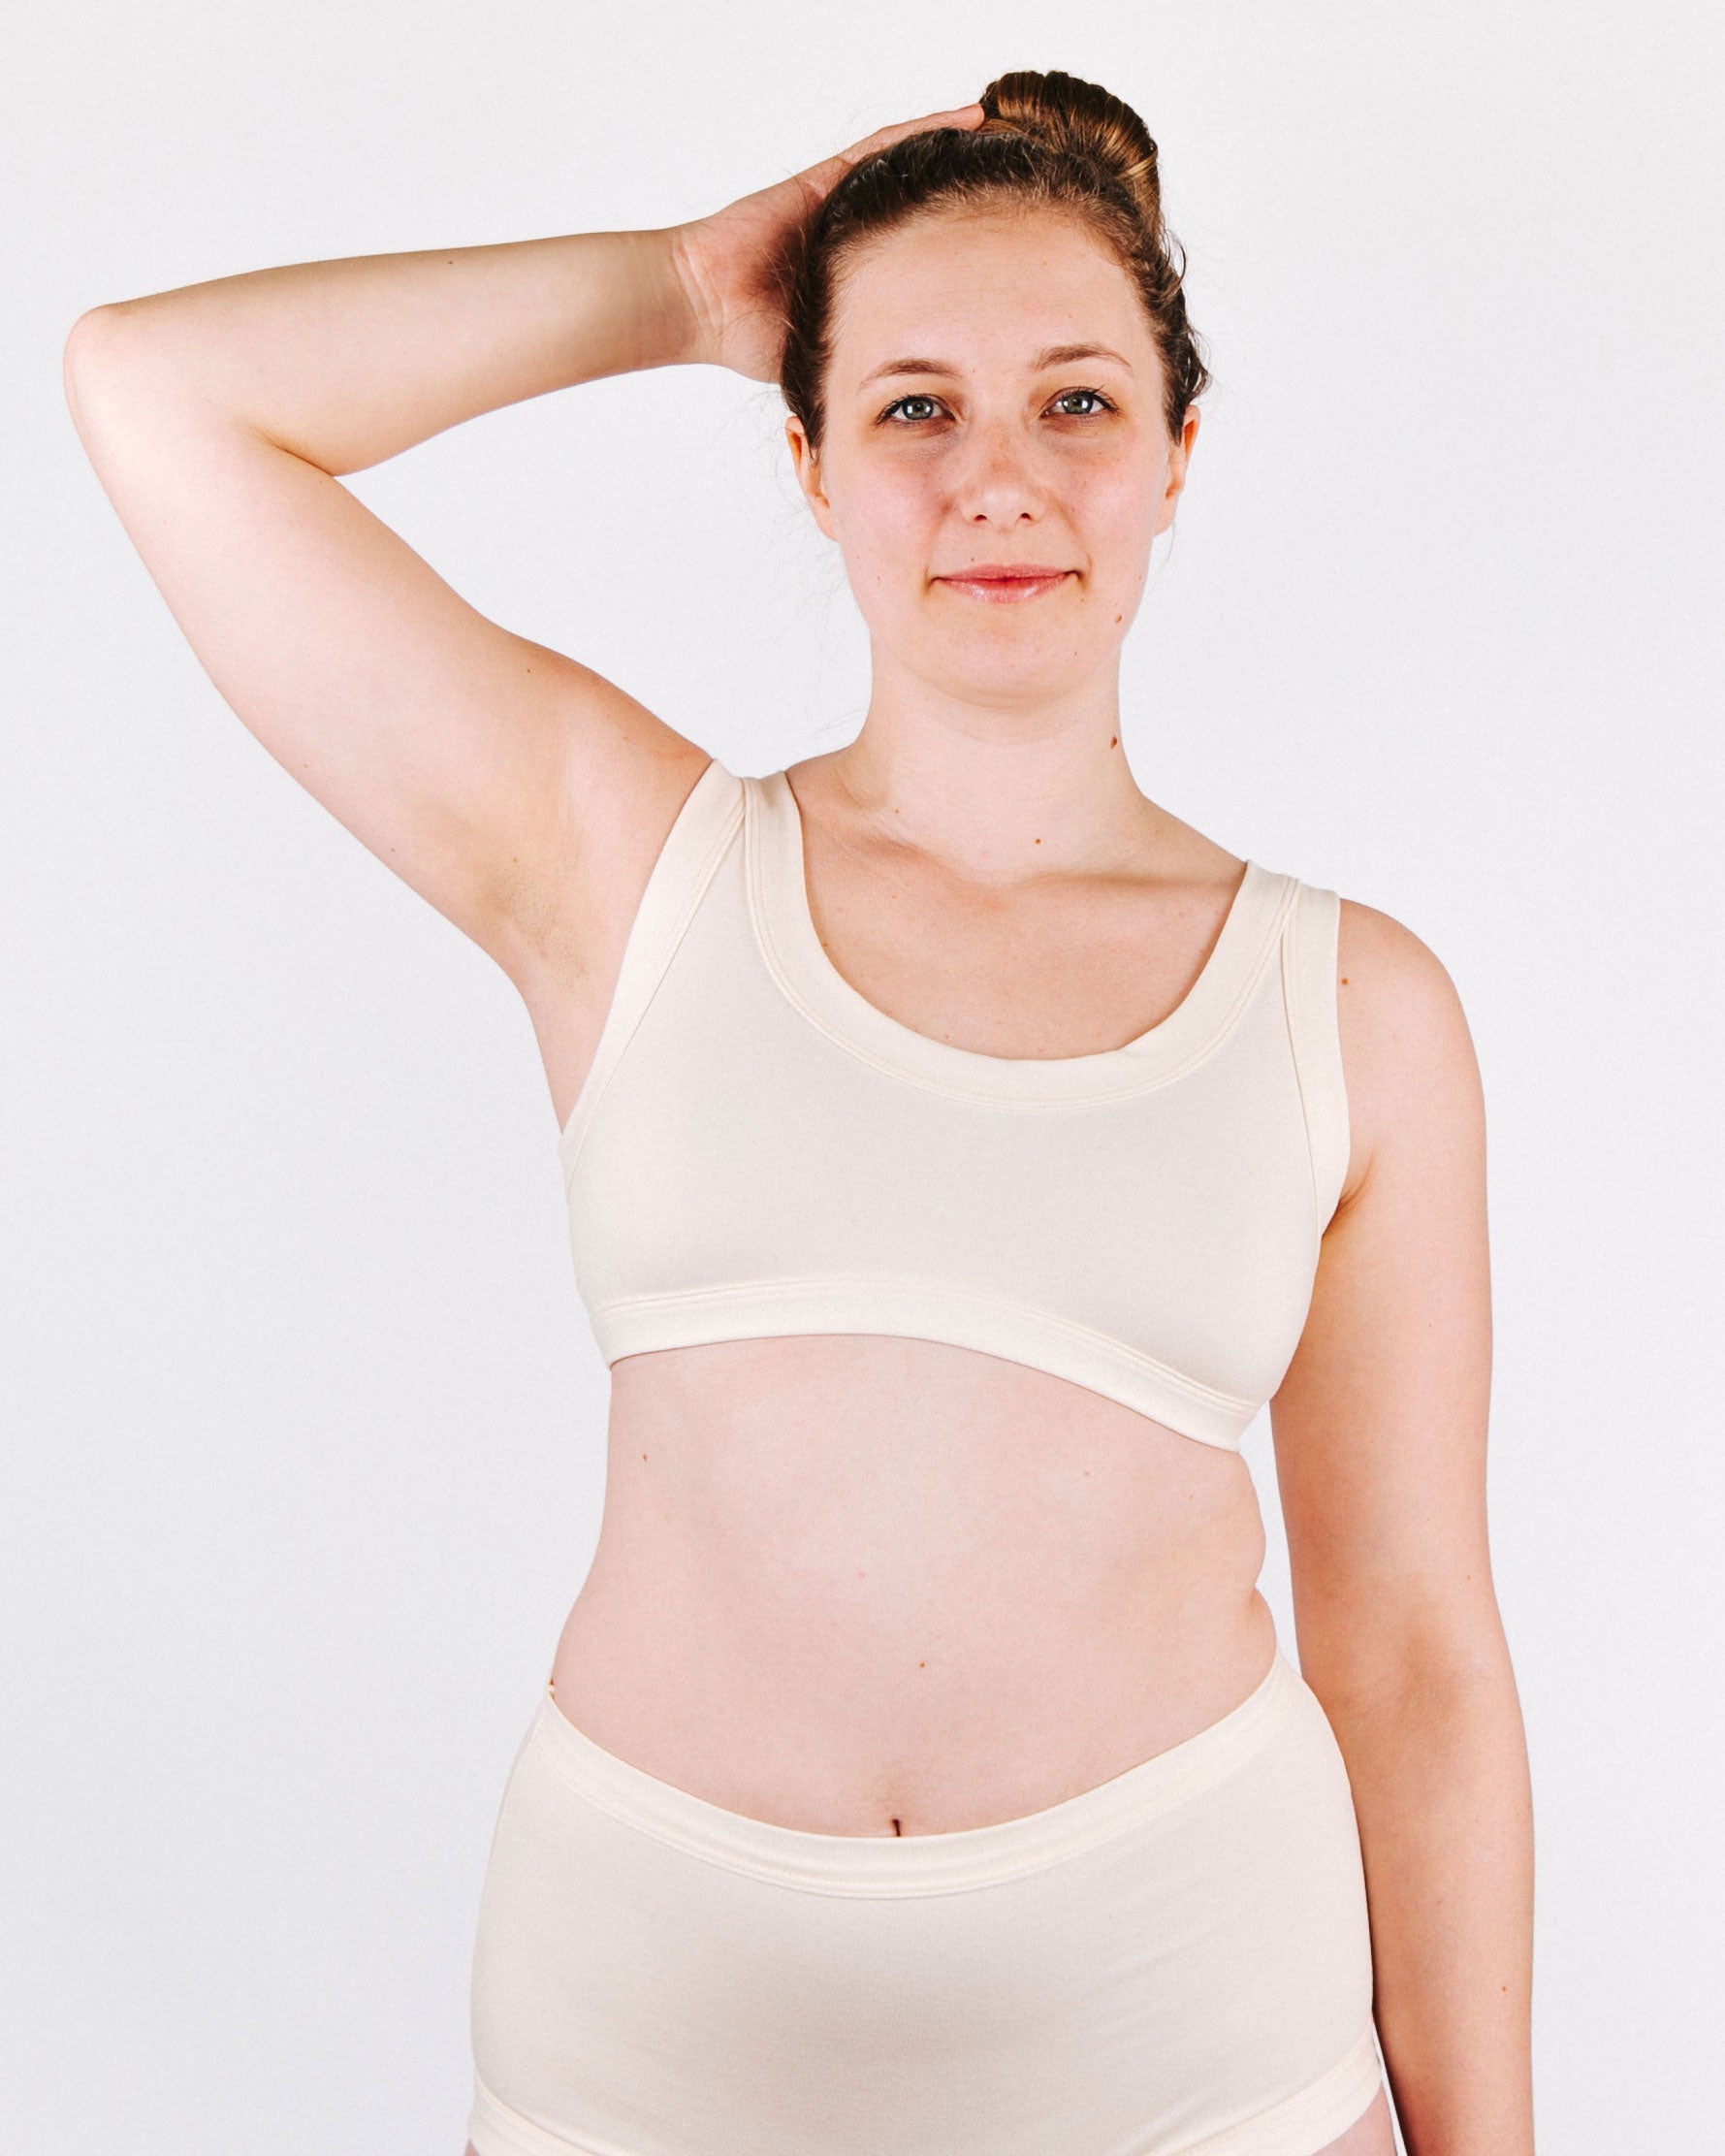 Fit photo from the front of Thunderpants organic cotton Bralette and Original Style underwear in off-white on a model.